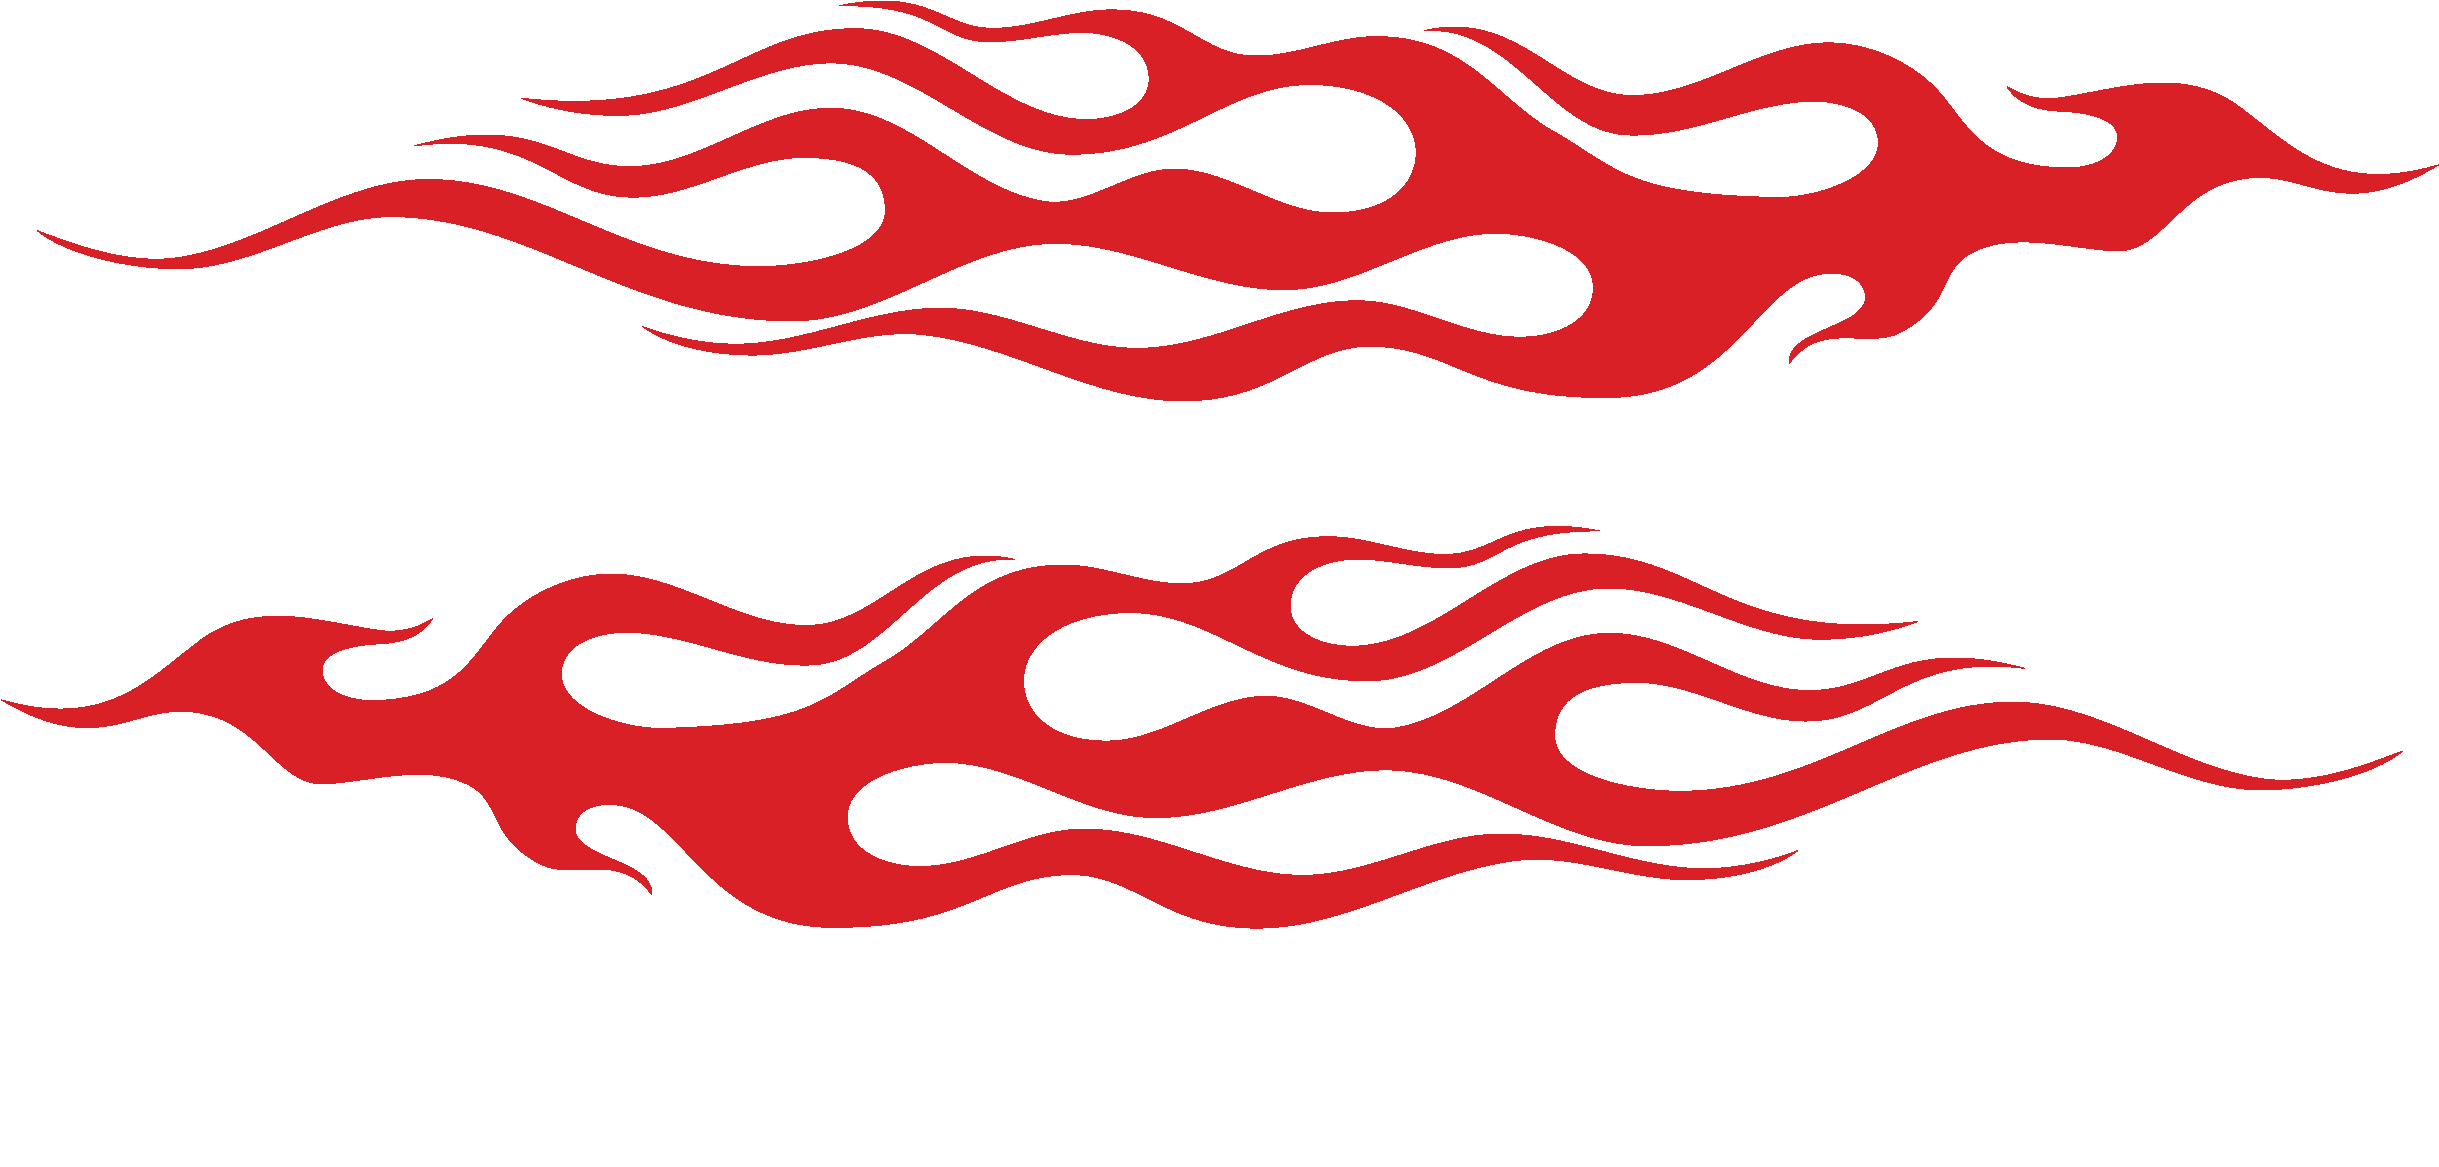 Fire Decal Png Free Logo Image | Hot Sex Picture